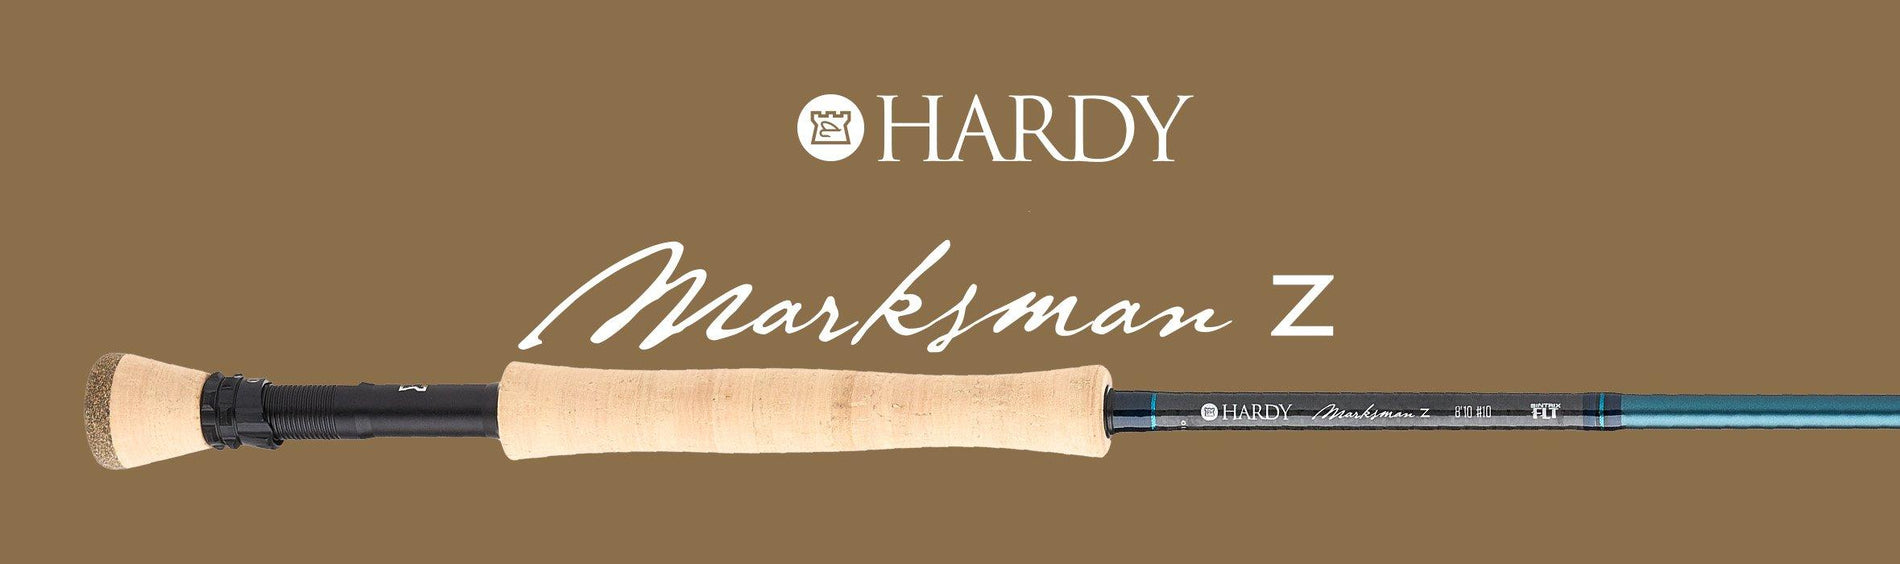 Hardy Marksman Z Review - Fly Rod Reviews - New Saltwater Rods Announc